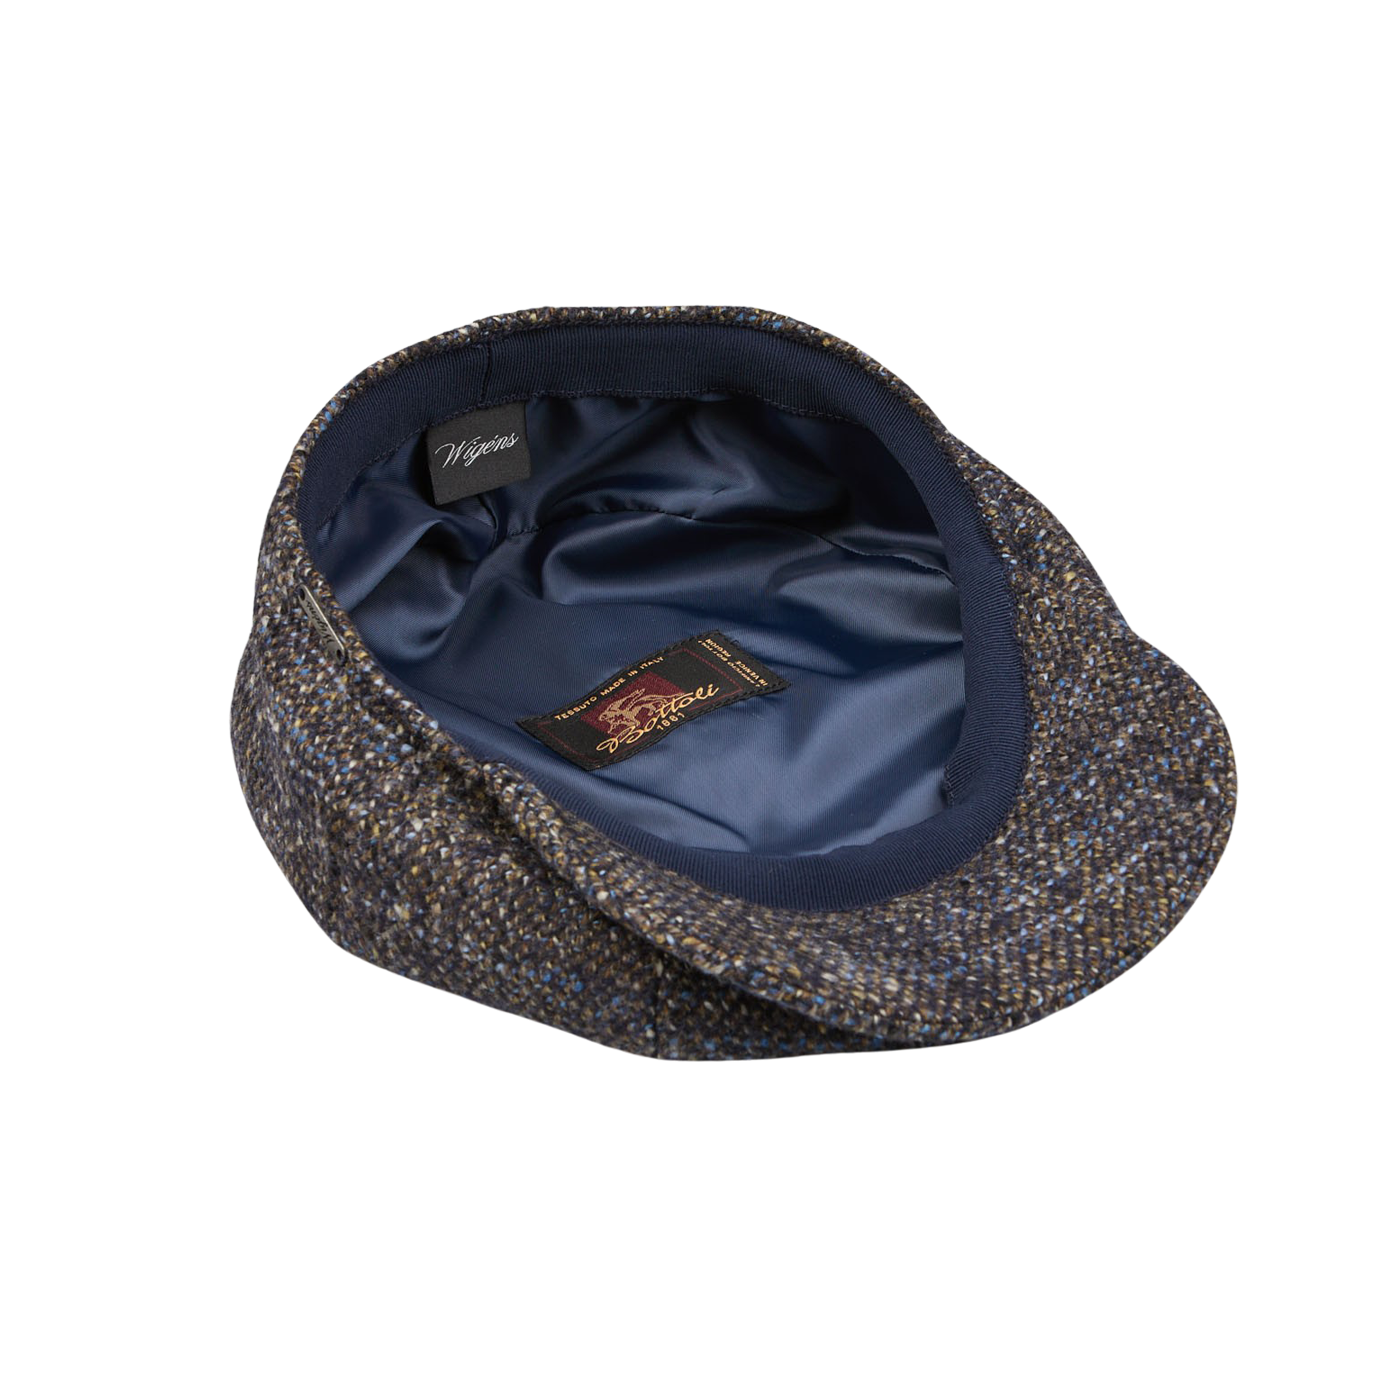 A Wigéns Blue Melange Wool Ivy Contemporary Cap with a blue pocket, made from a wool blend.